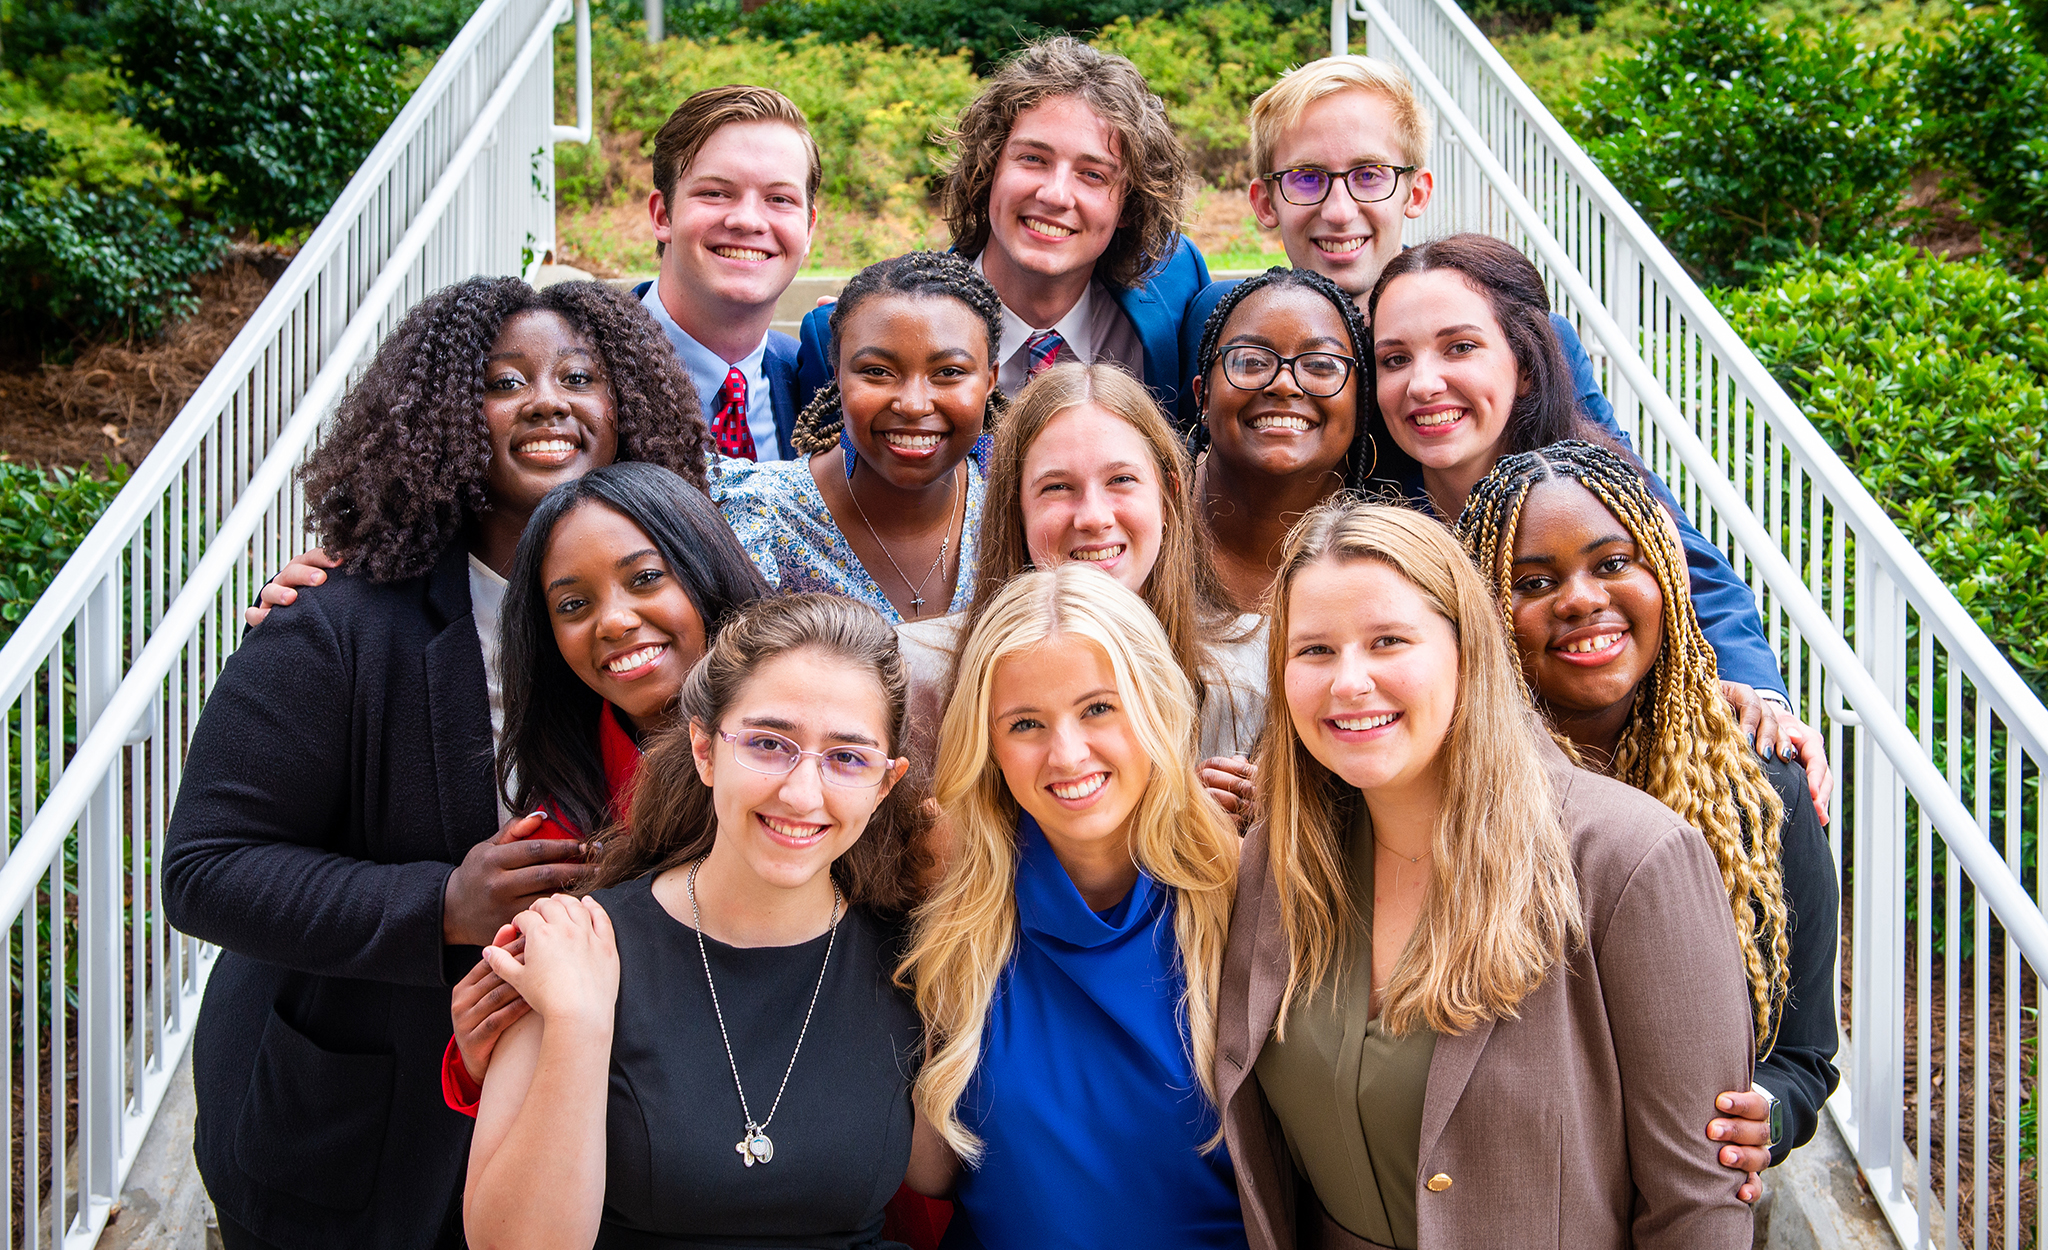 Stamps Scholars are selected based on academic excellence, leadership experience and exceptional character. UM freshmen in the Class of 2026 cohort are (front, from left) Mary-del Jansen, Amber Amis and Ryleigh Johnson; (second row) Yasmine Ware, Olivia Bacon and Dymond Mitchell; (third row) Jasmine Sanders, Layla Ashley, Carolena Graham and McKenzie Cox; and (fourth row) Ethan Roberts, Hayden Walker and Andrew Nichols. Photo by Bill Dabney/UM Foundation